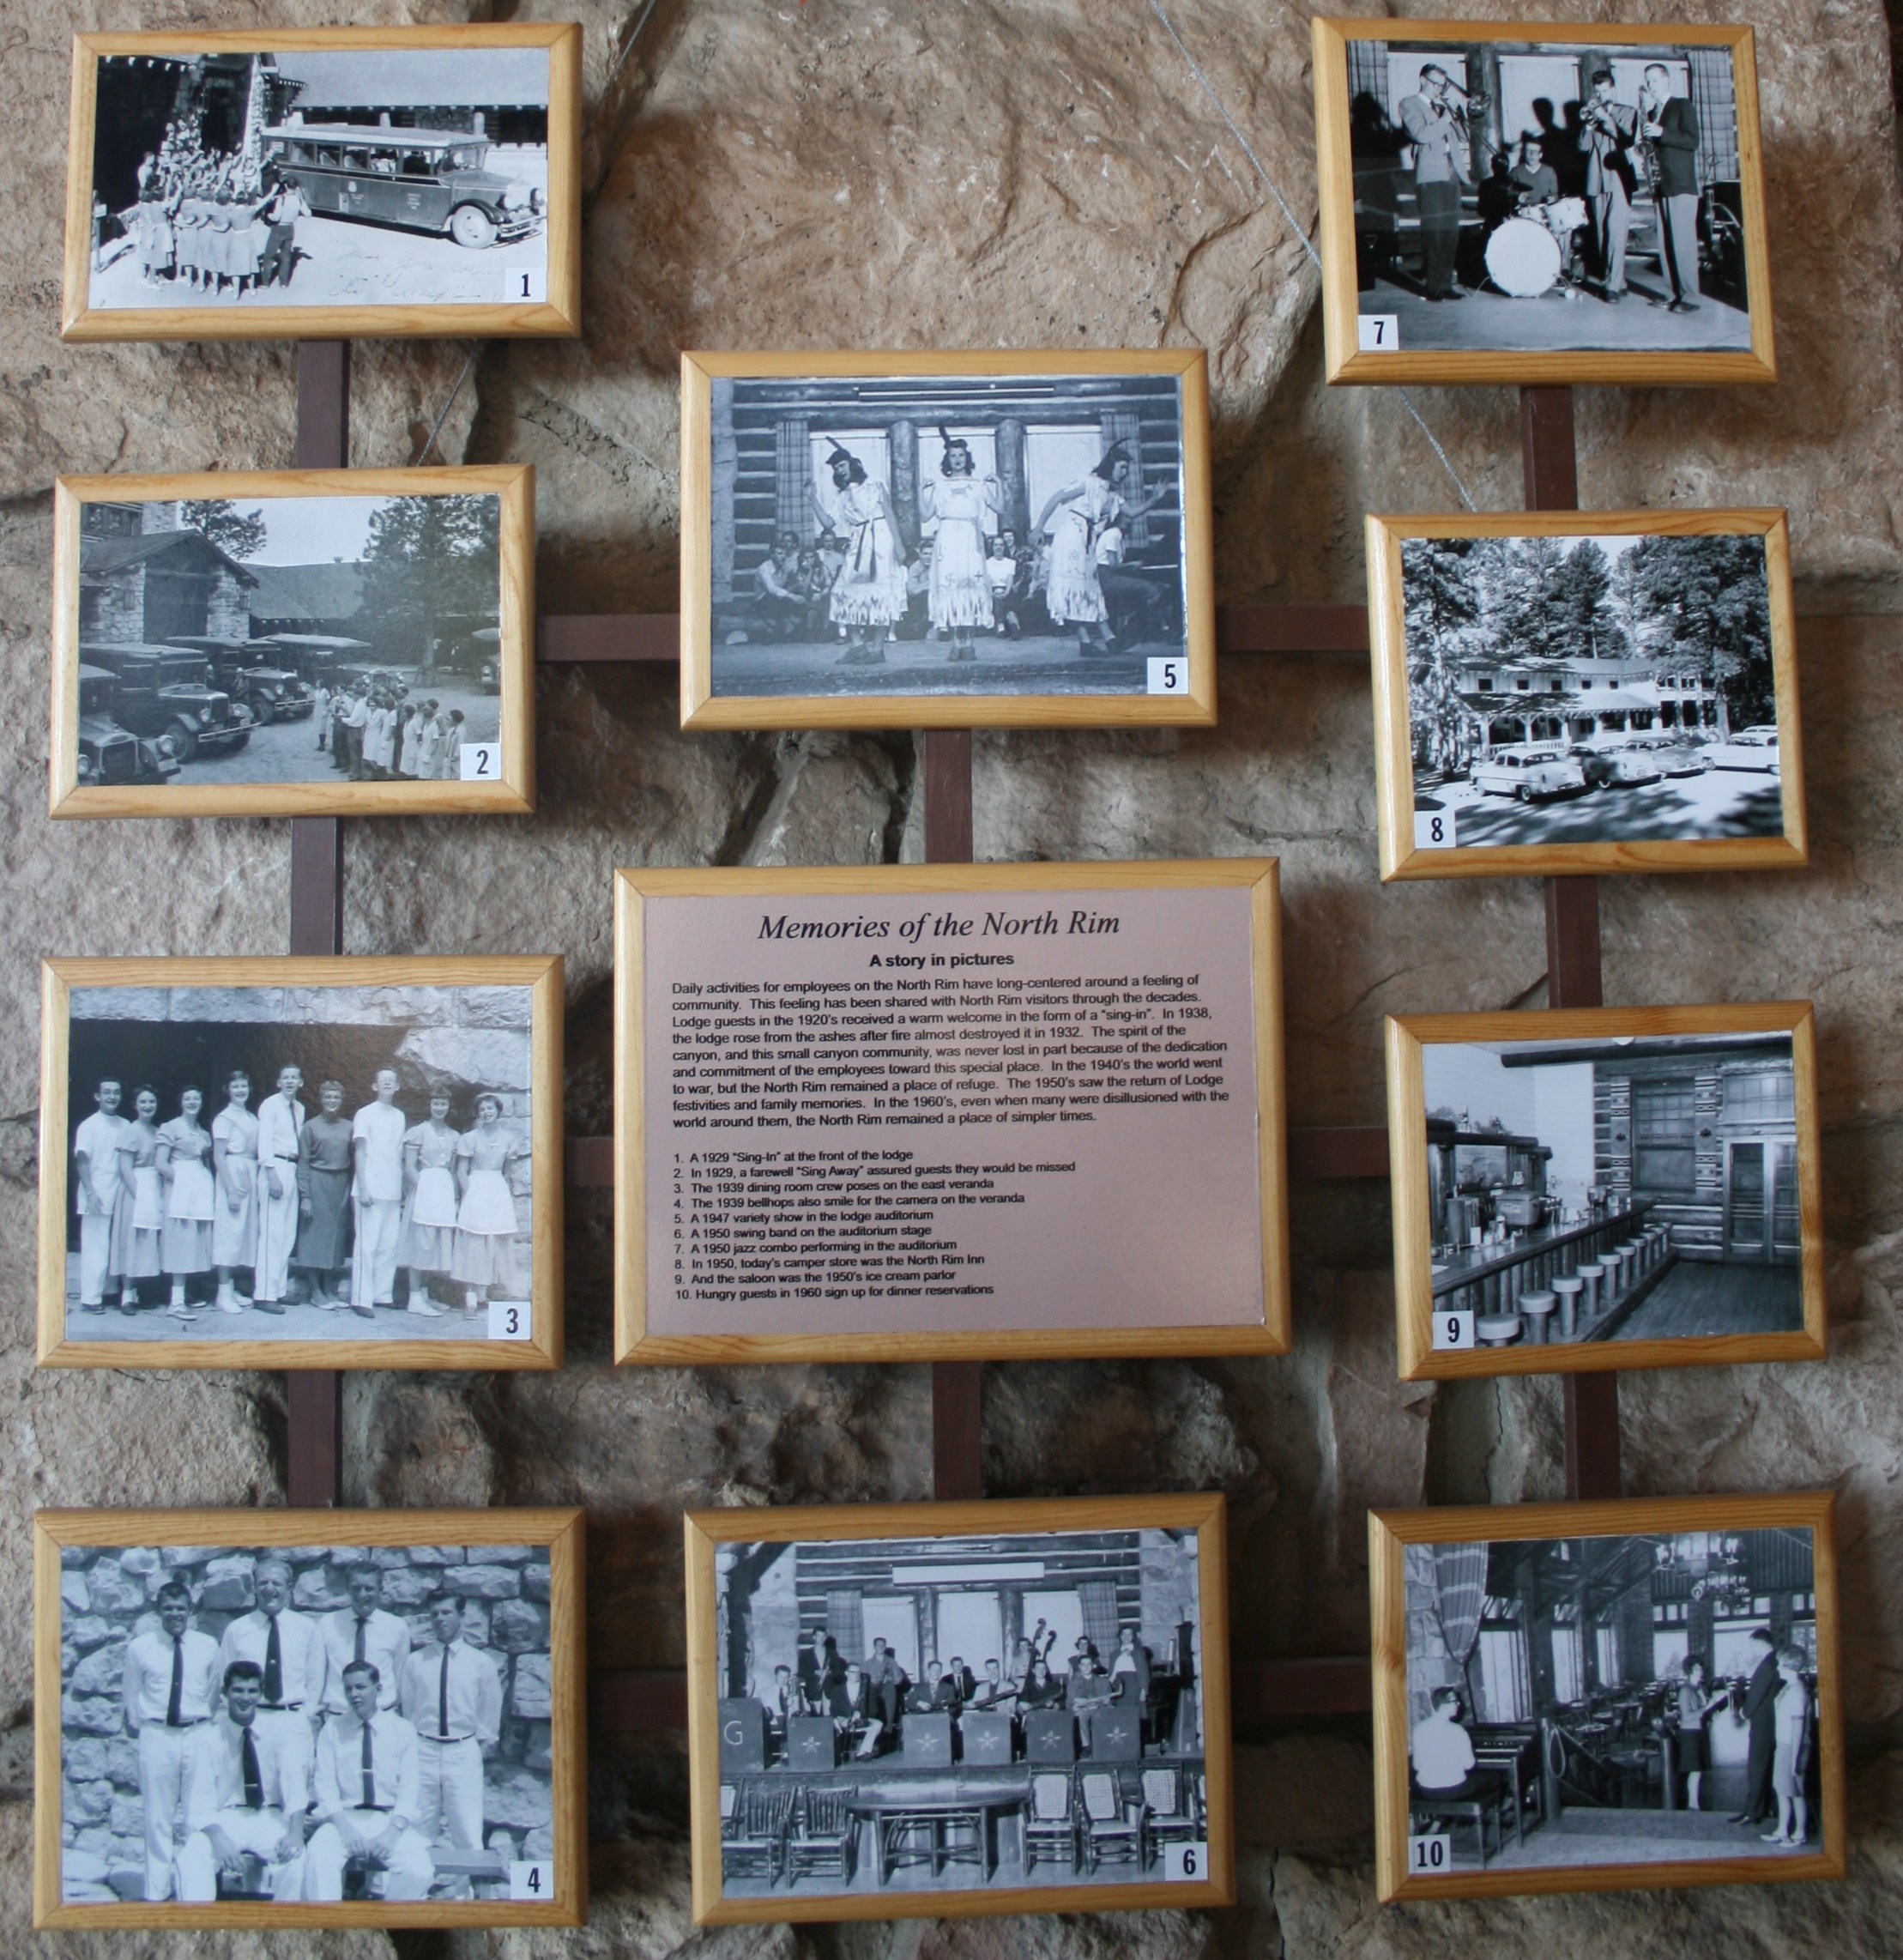 Vintage photos of earlier years at the Grand Canyon appear in the North Rim lodge.